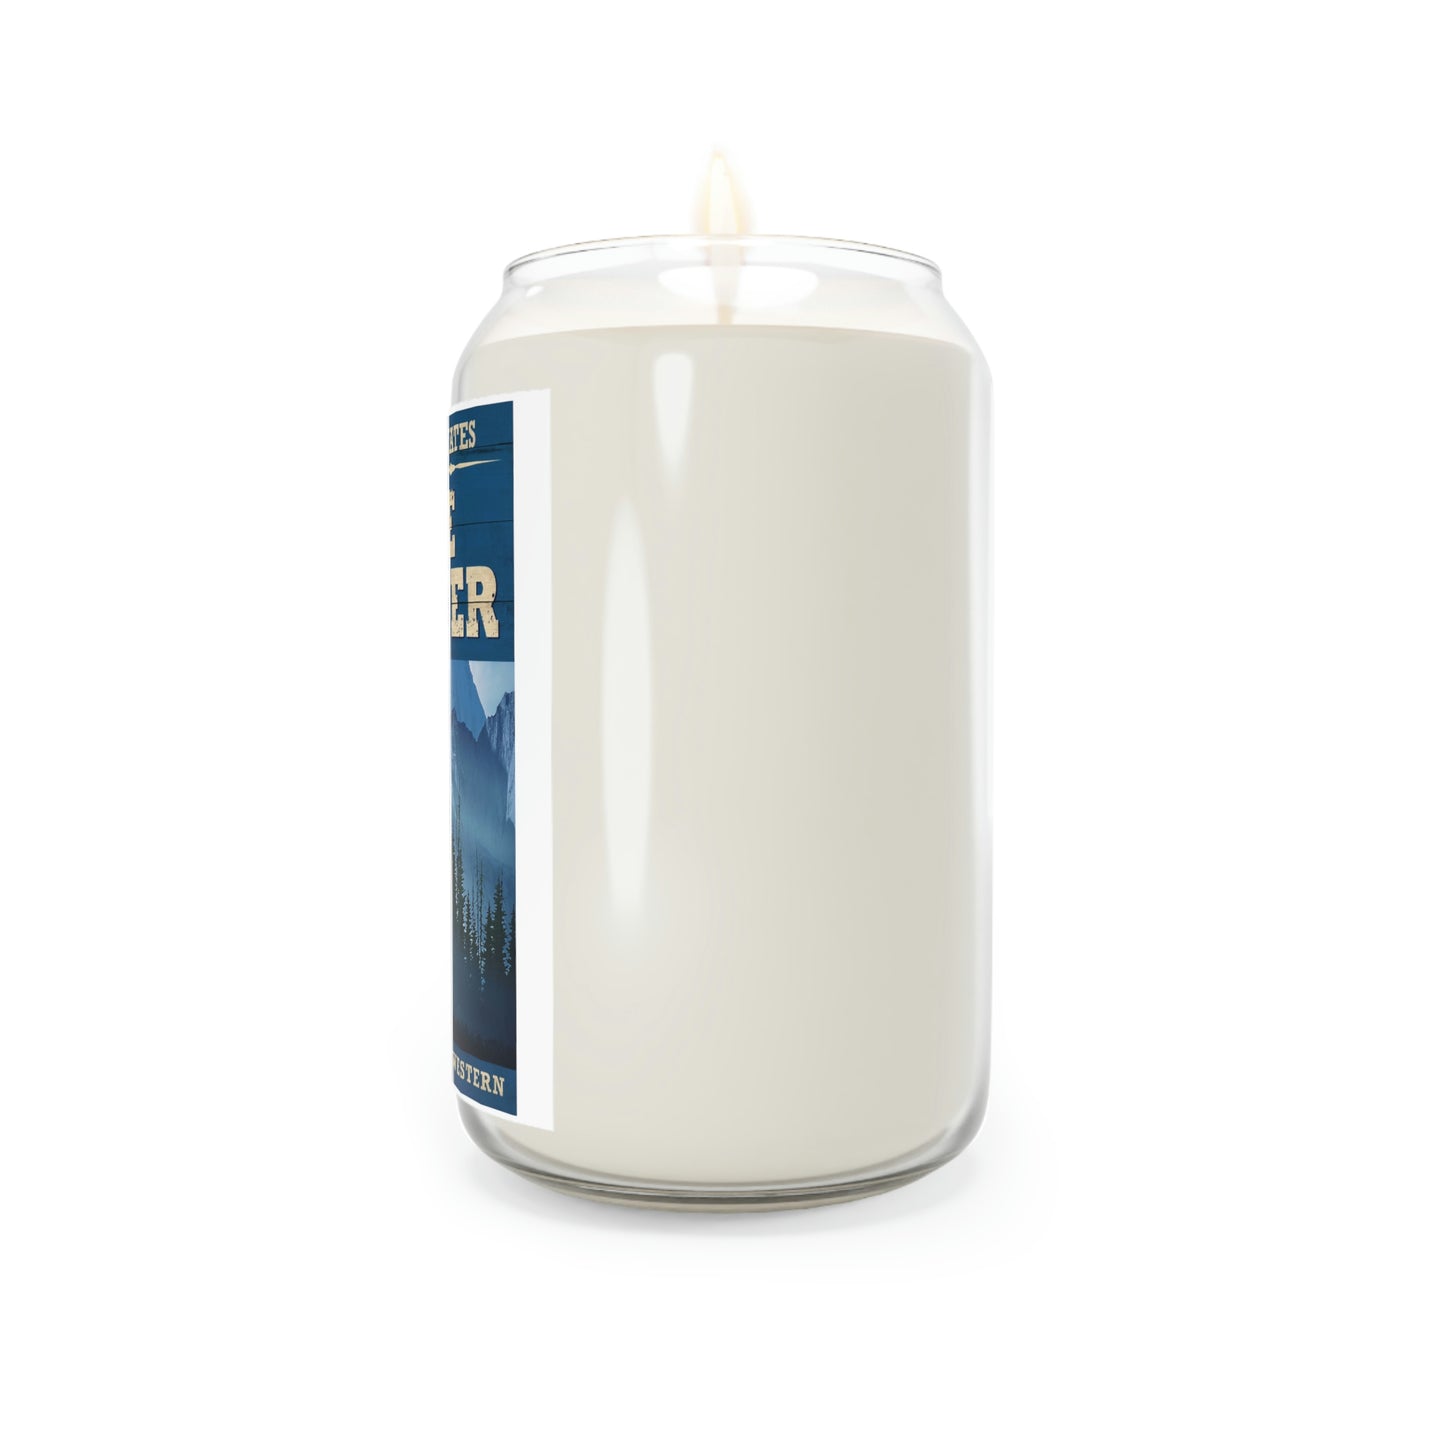 The Hunter - Scented Candle